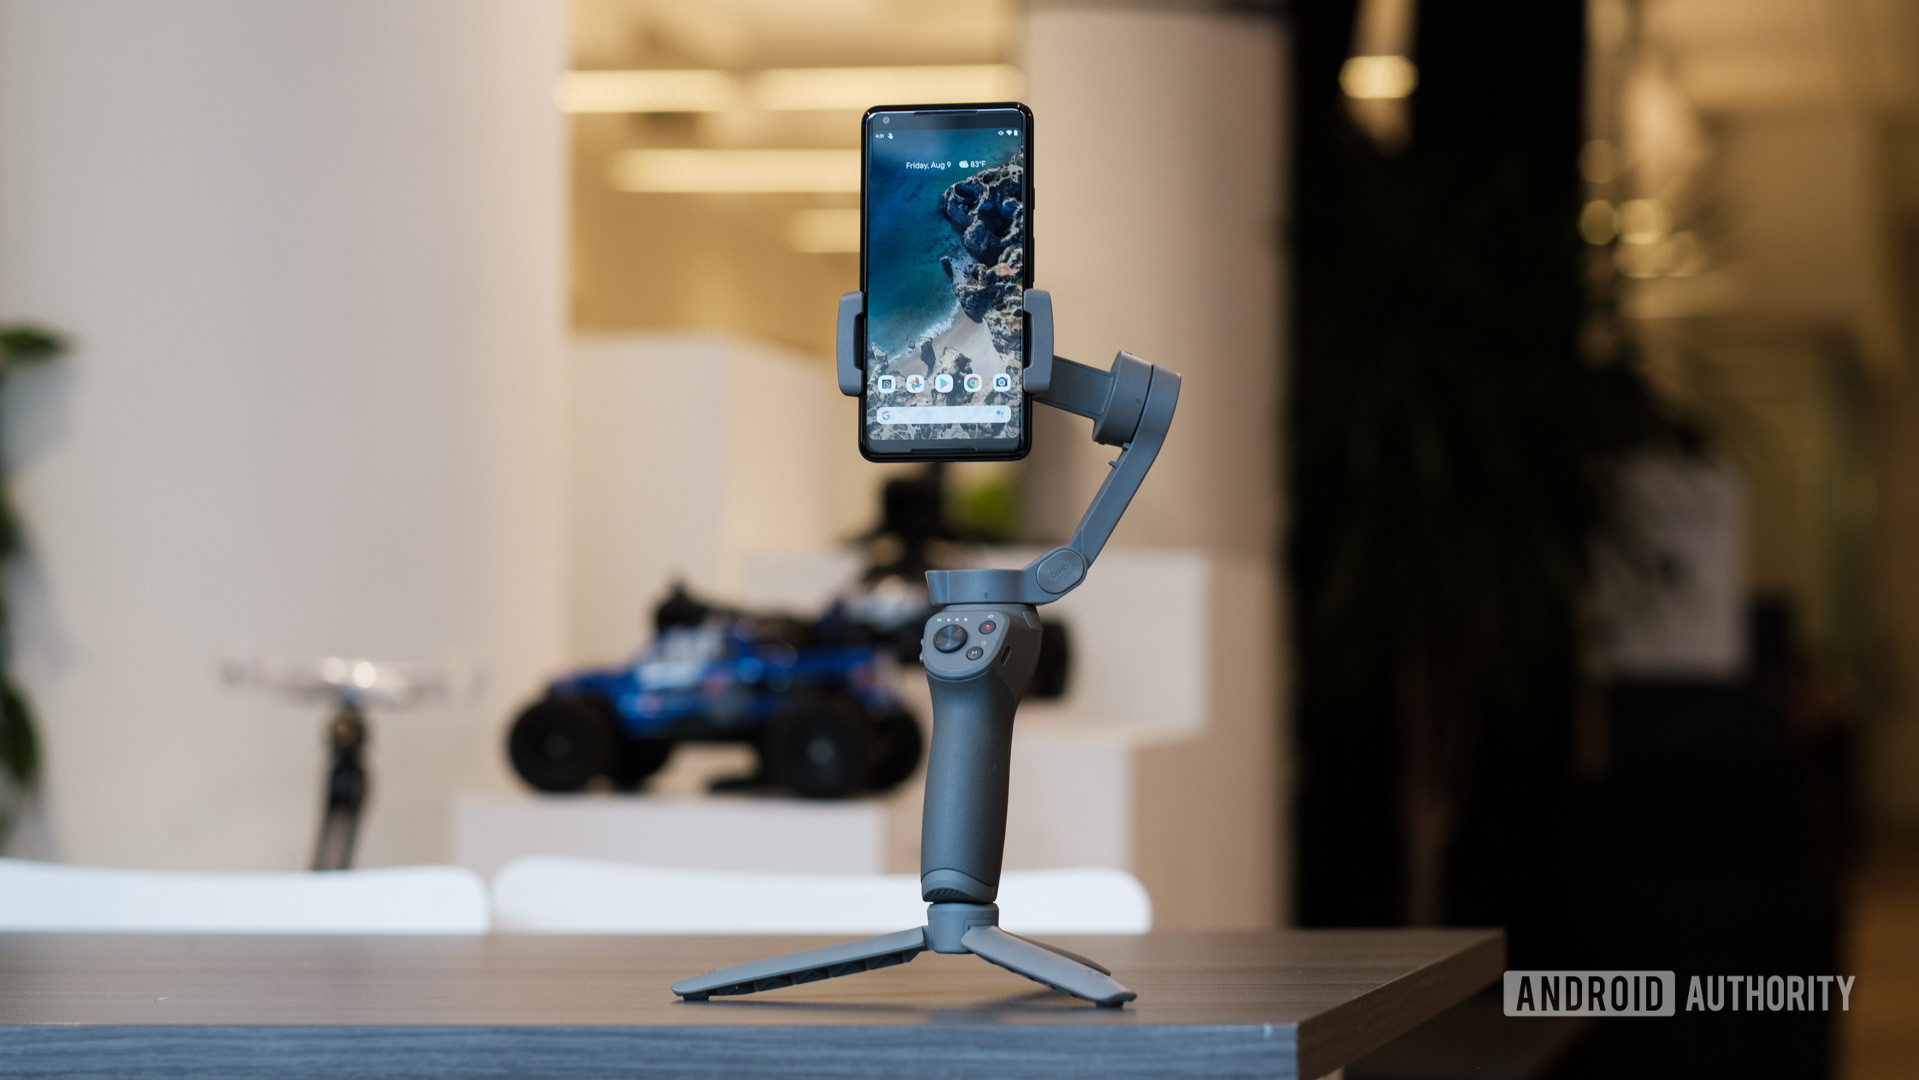 DJI Osmo Mobile 3 on table with Pixel